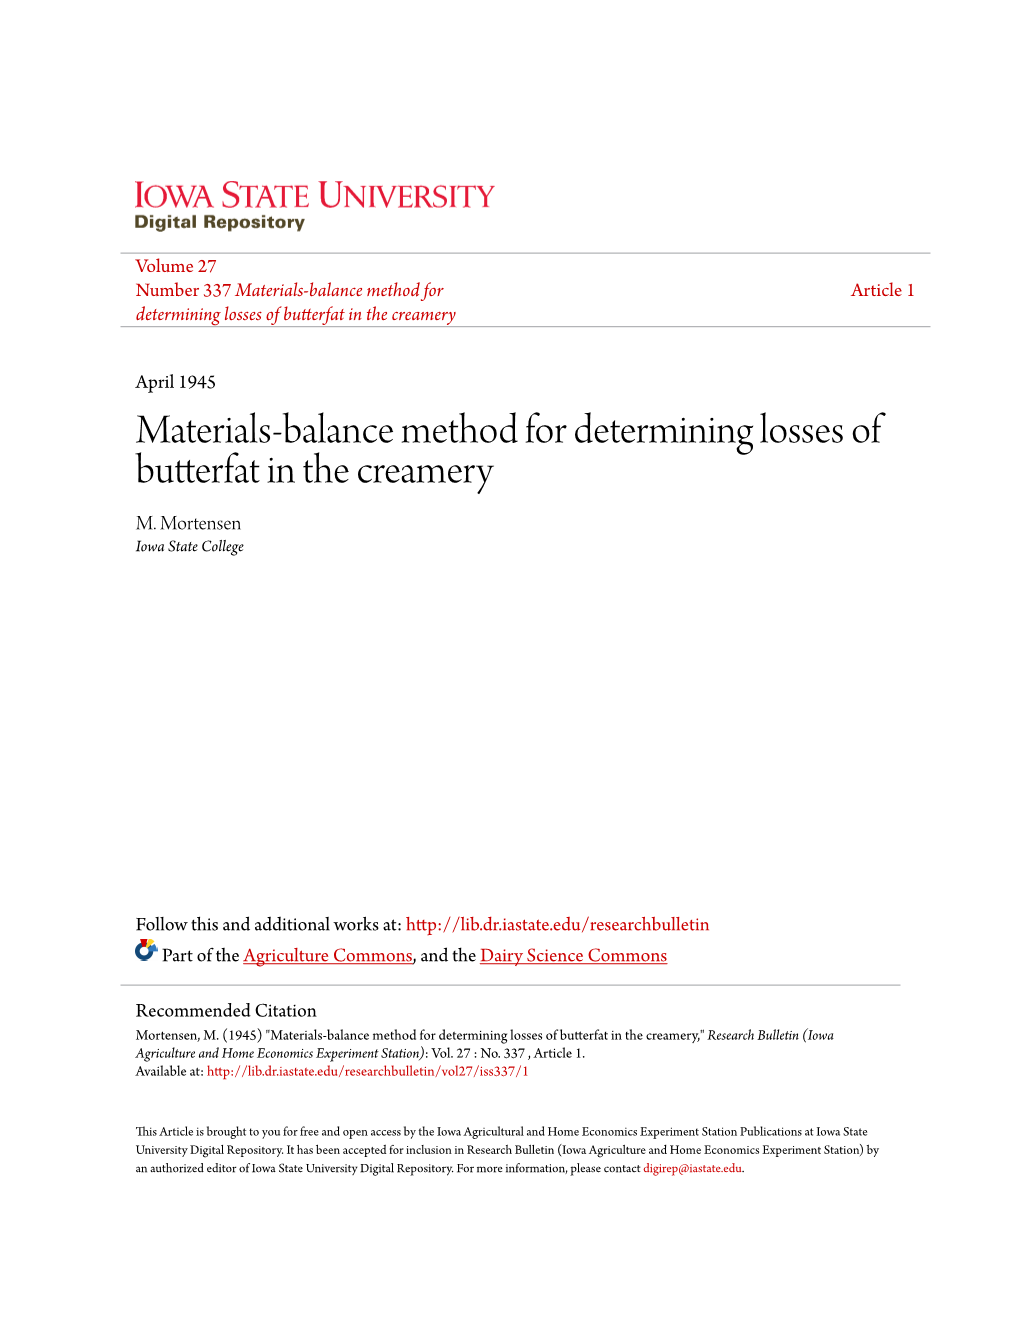 Materials-Balance Method for Determining Losses of Butterfat in the Creamery M